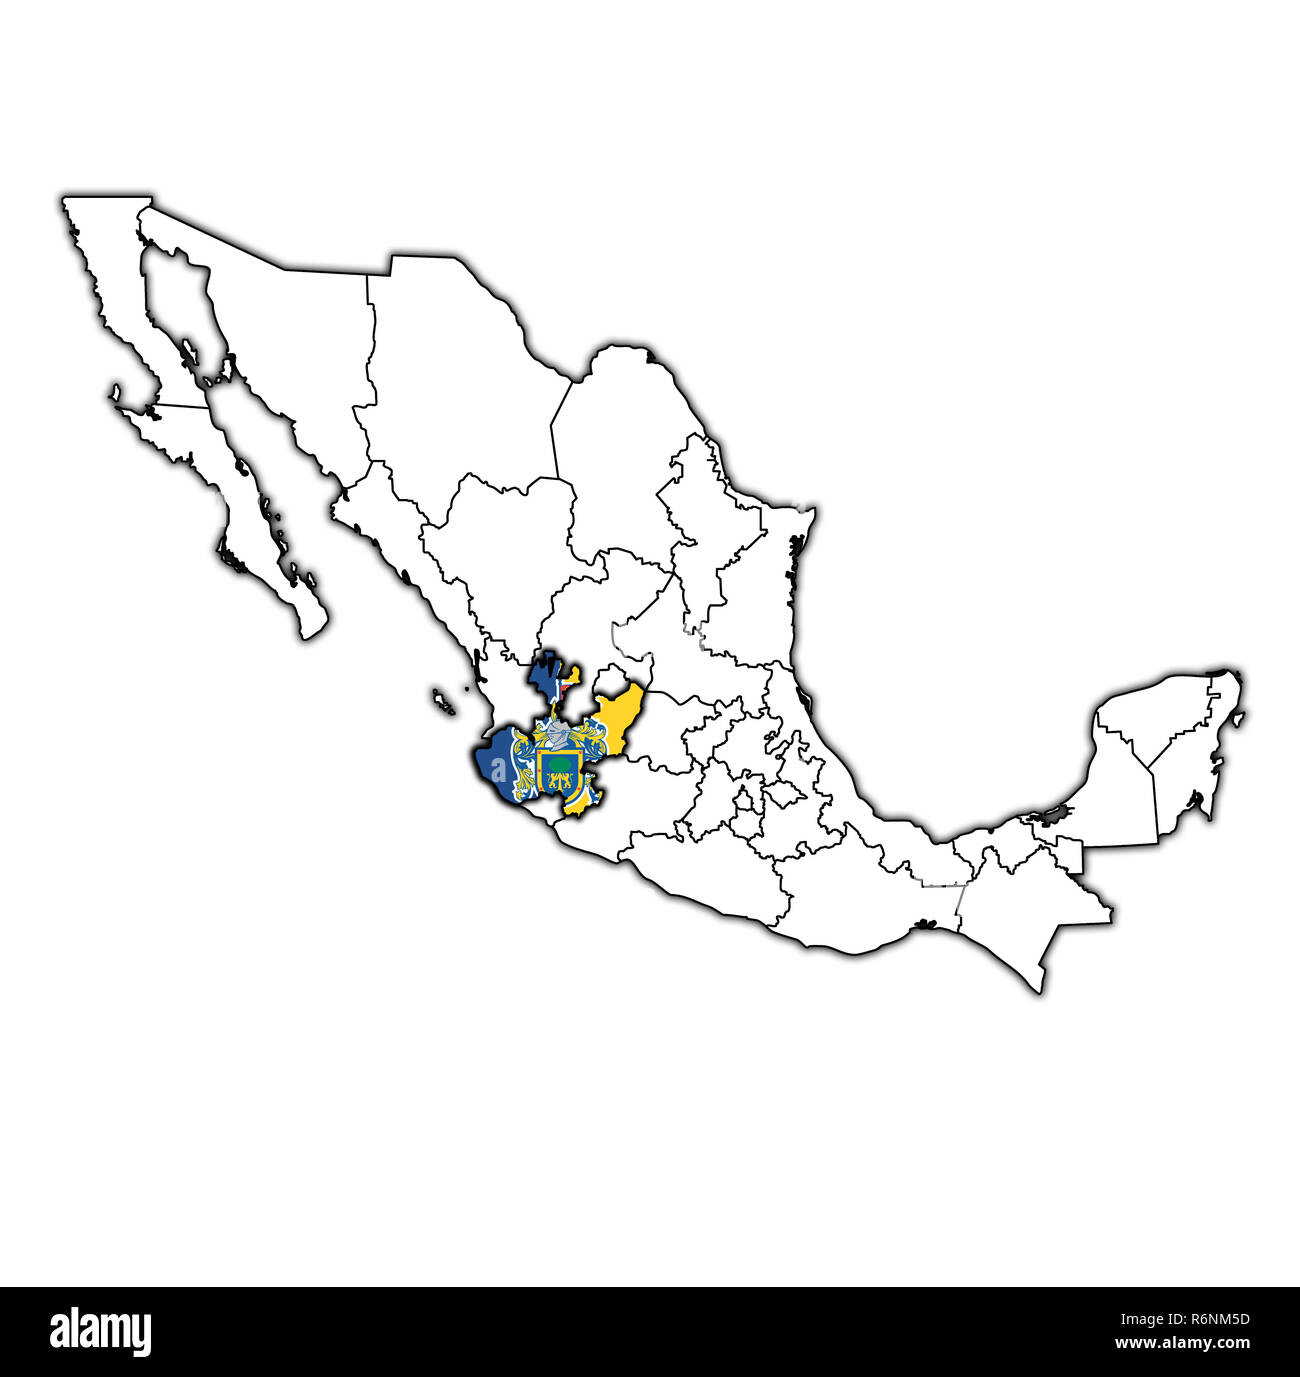 Jalisco state on administration map of Mexico Stock Photo